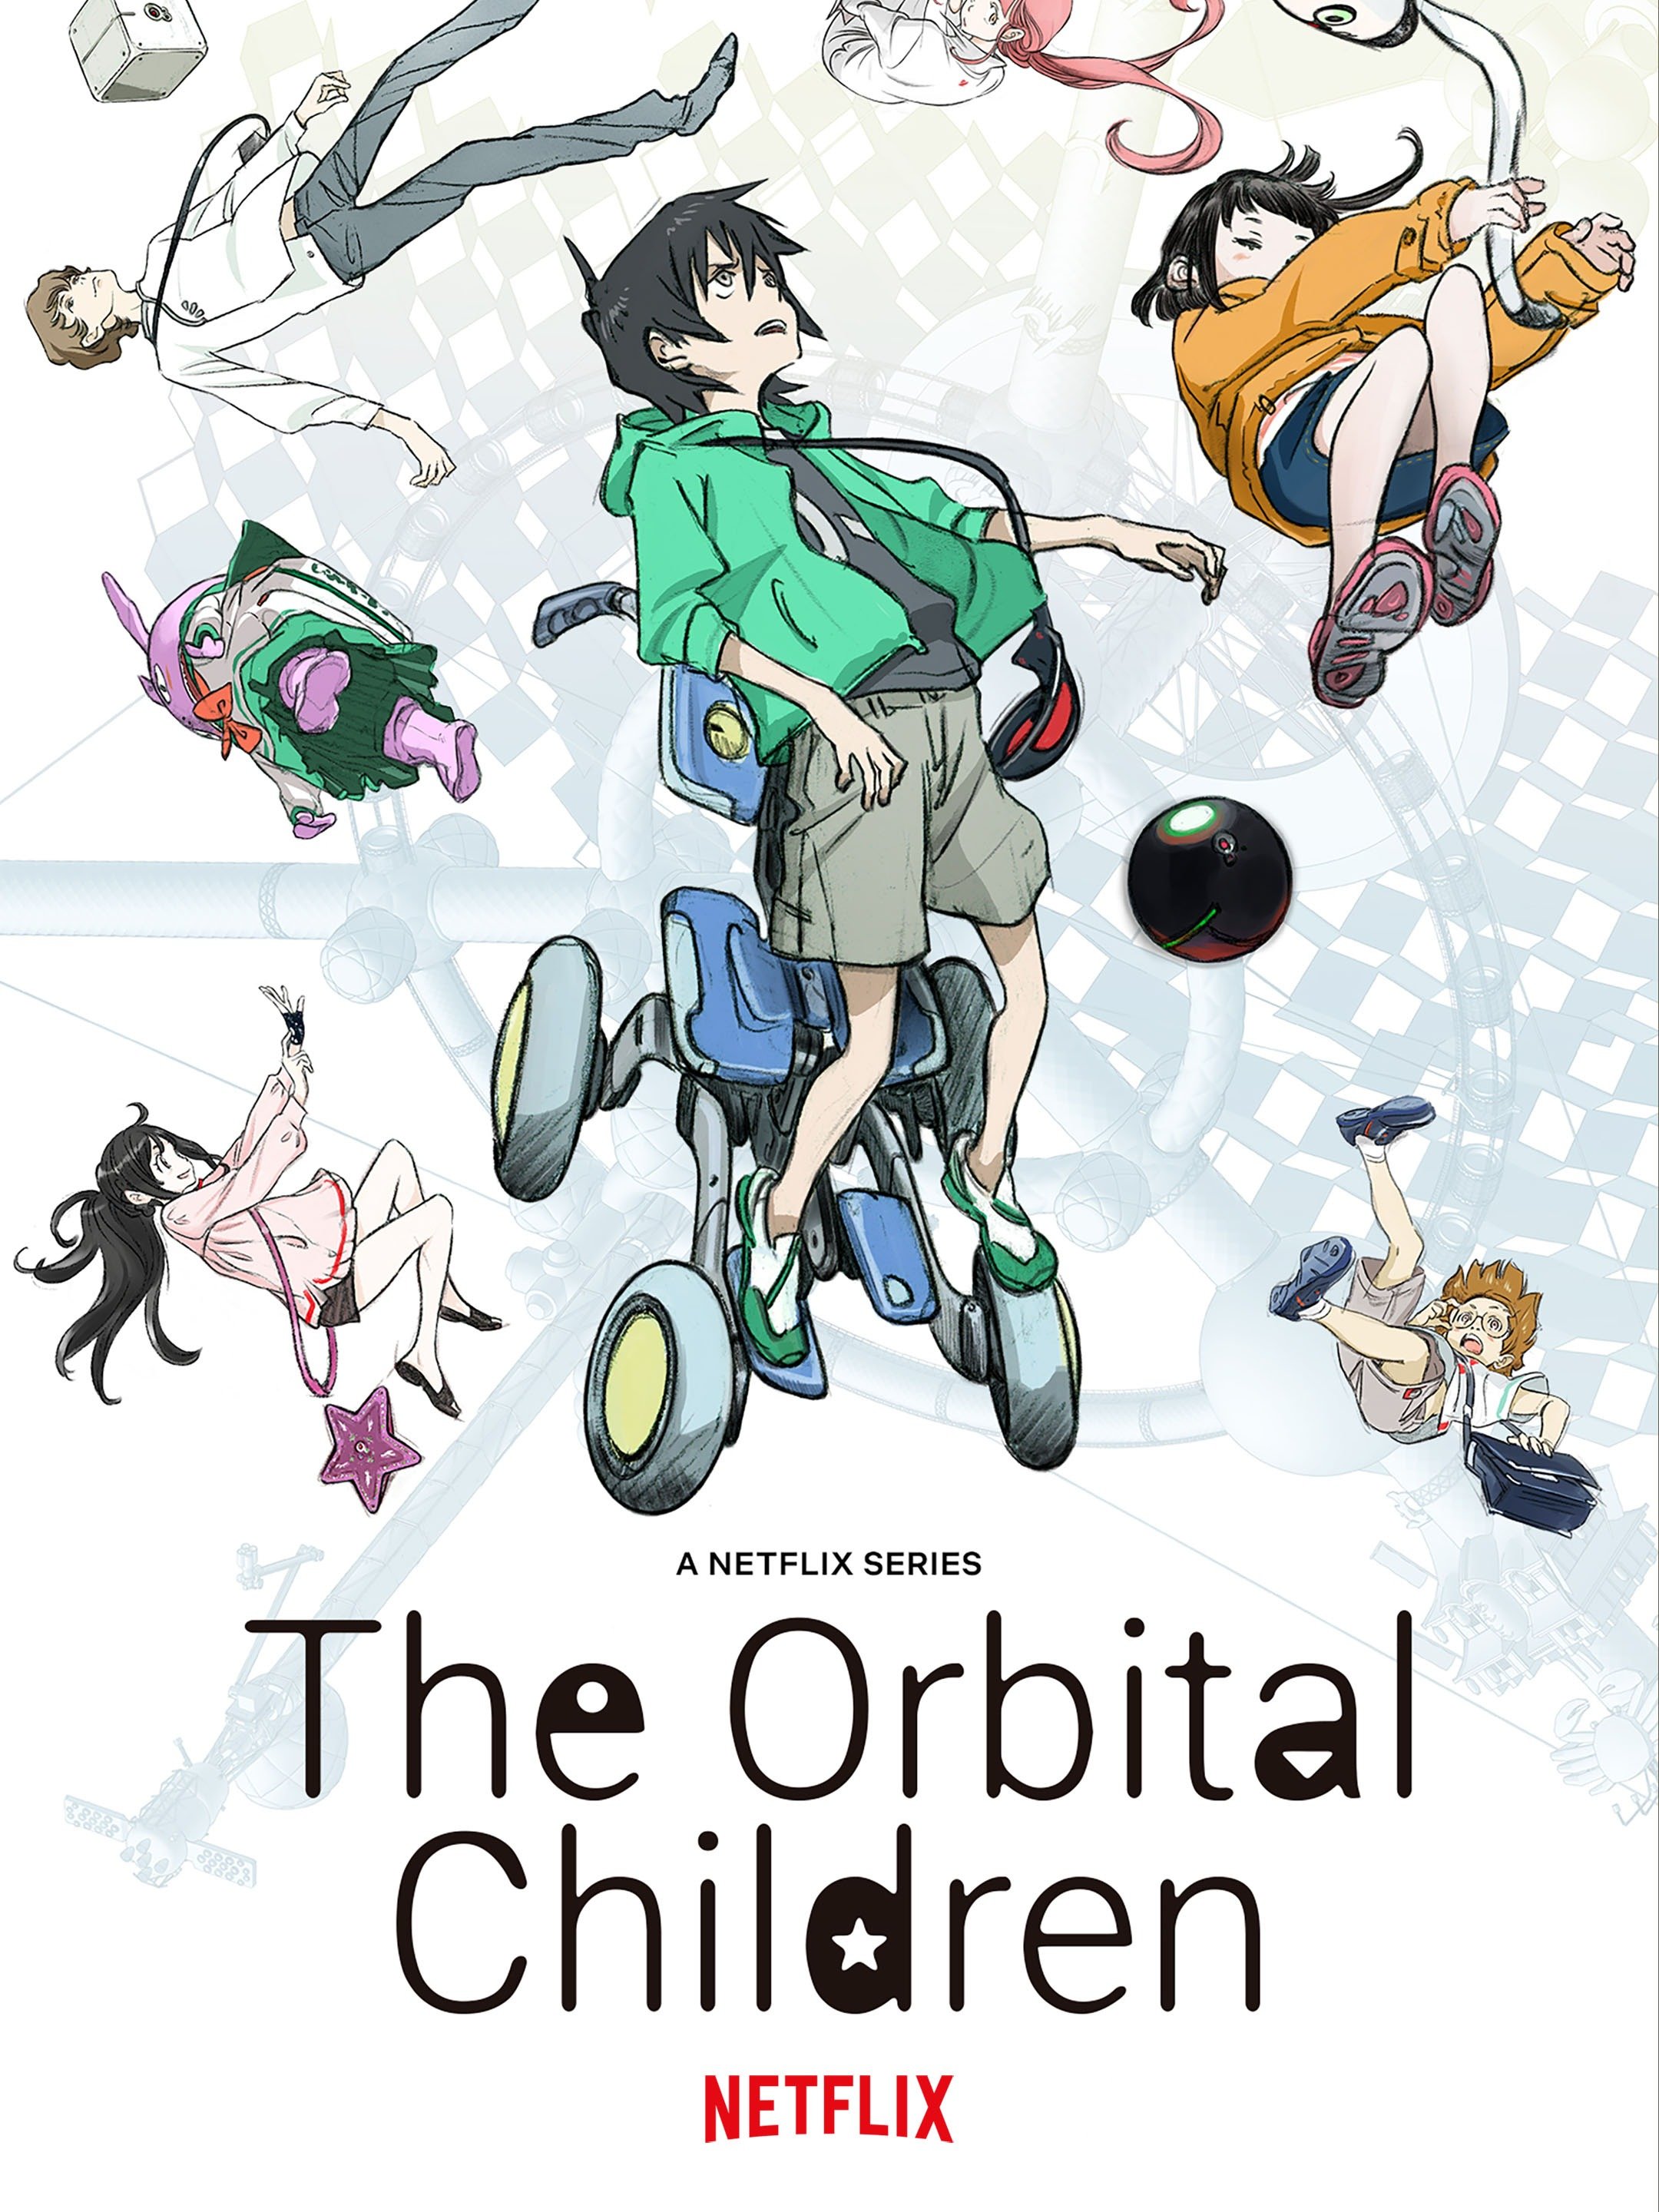 The Orbital Children trailer and key visual suggests an exciting anime  series — WATCH!! – Leo Sigh